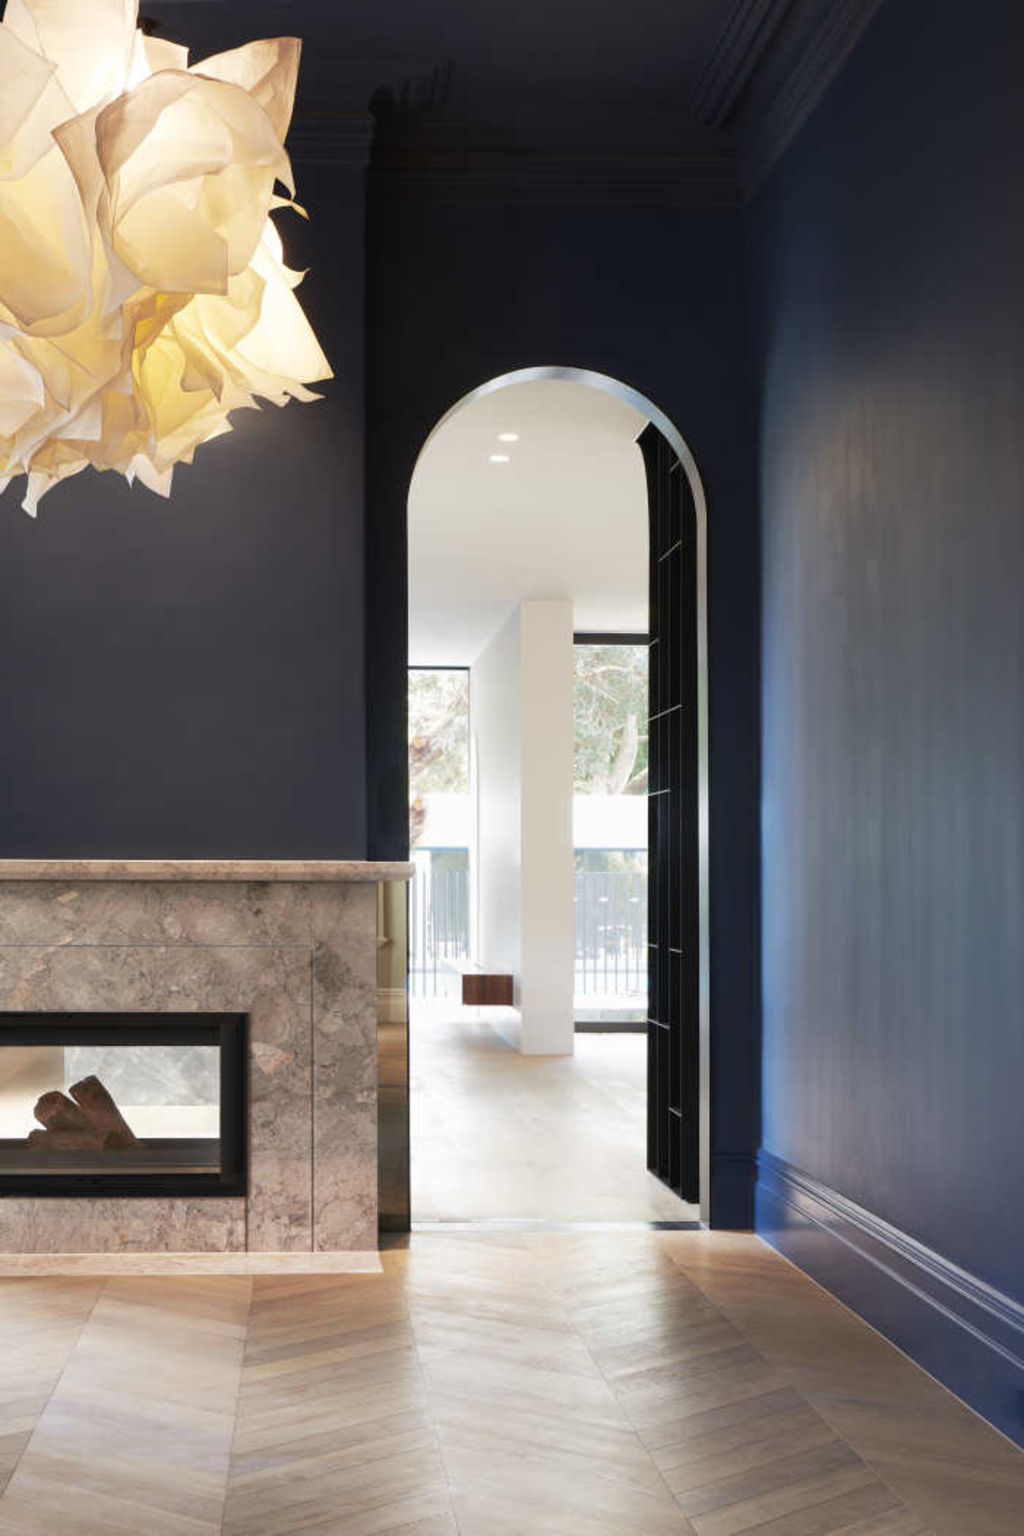 Dark blue in the dining room sets off the cloud lighting feature. Photo: Dominik Scmarsel